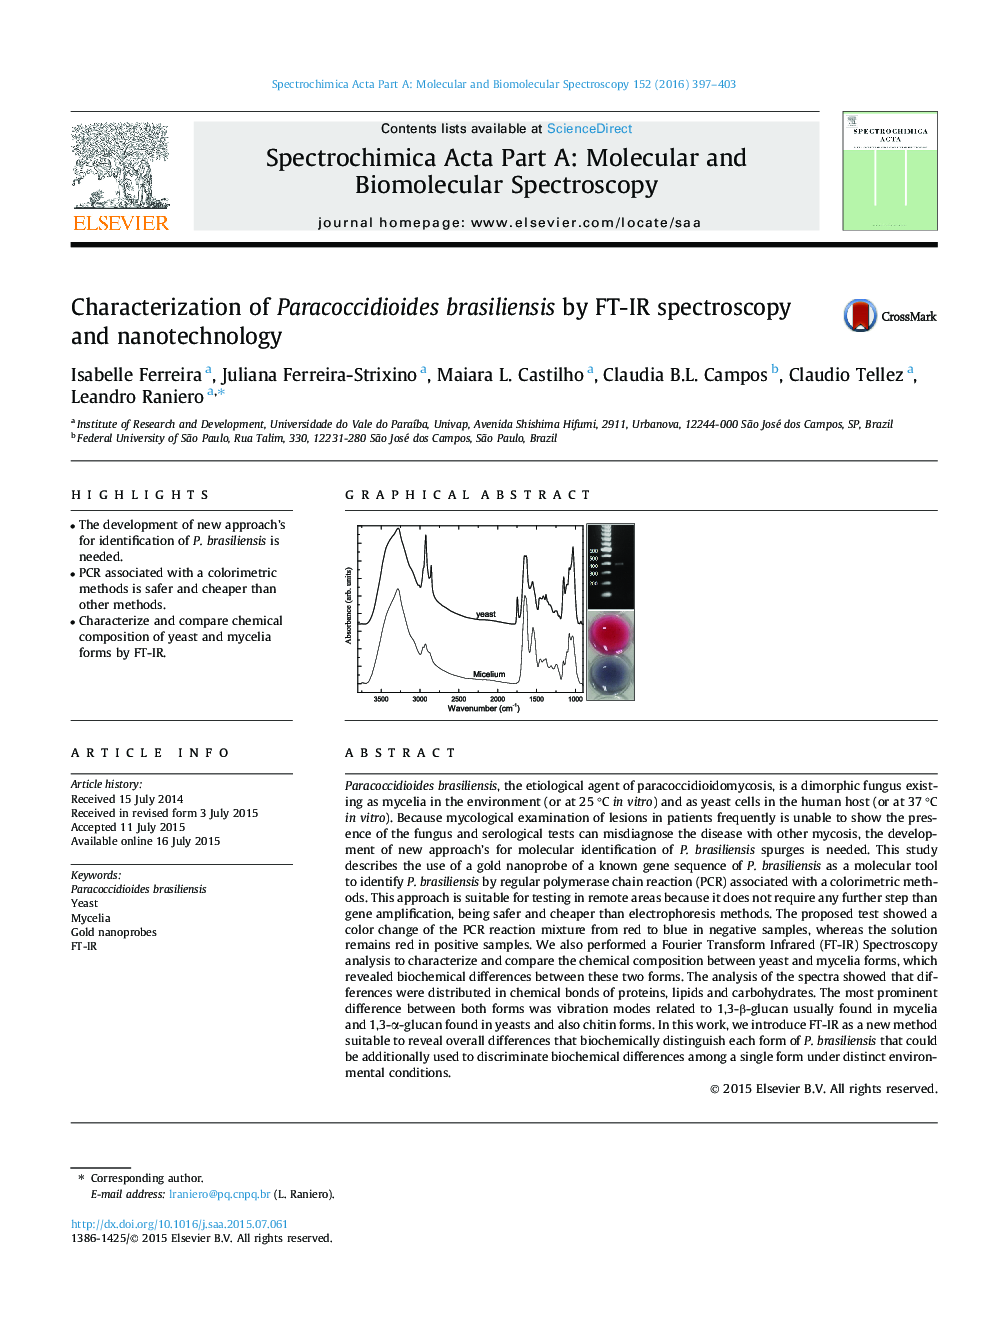 Characterization of Paracoccidioides brasiliensis by FT-IR spectroscopy and nanotechnology